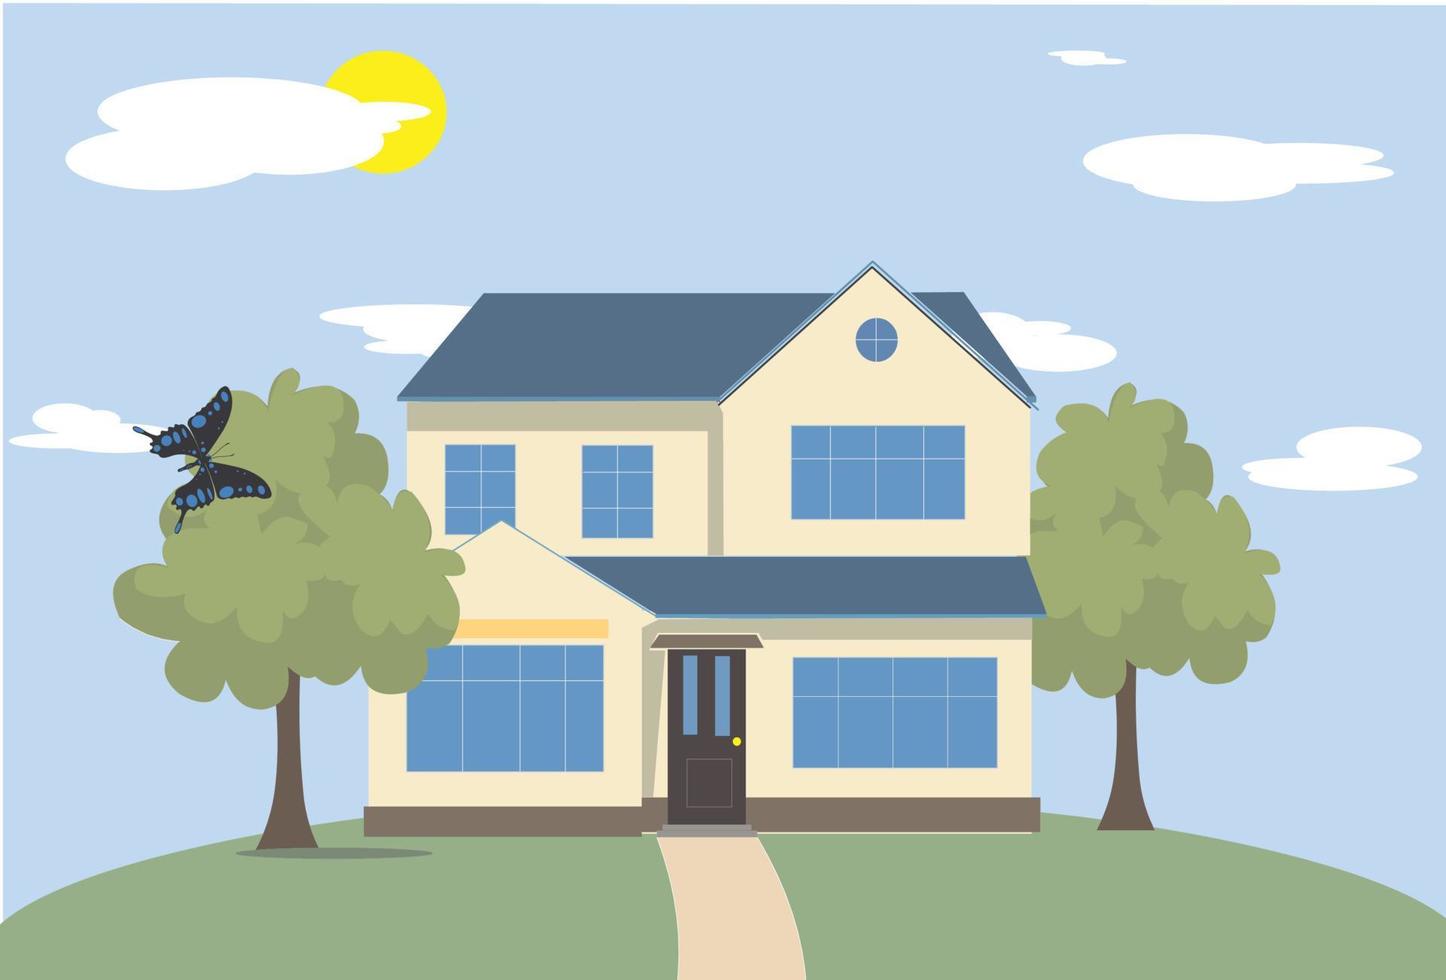 vector illustration of a house with a butterfly on a tree